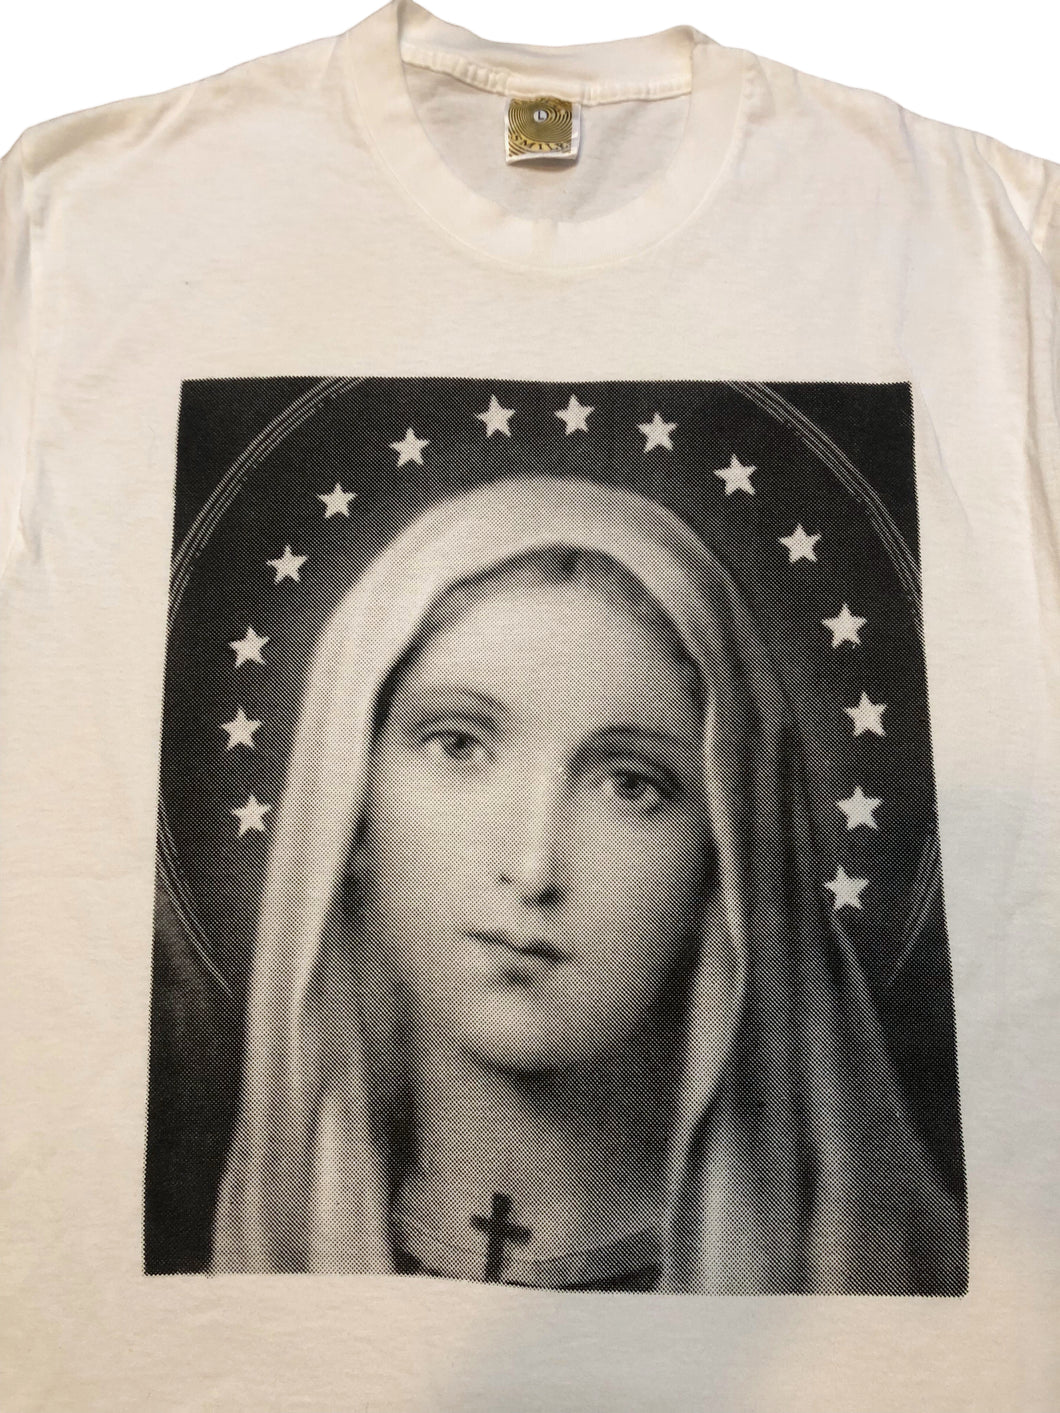 1990s Archaic Smile Mother Mary Portrait Tee